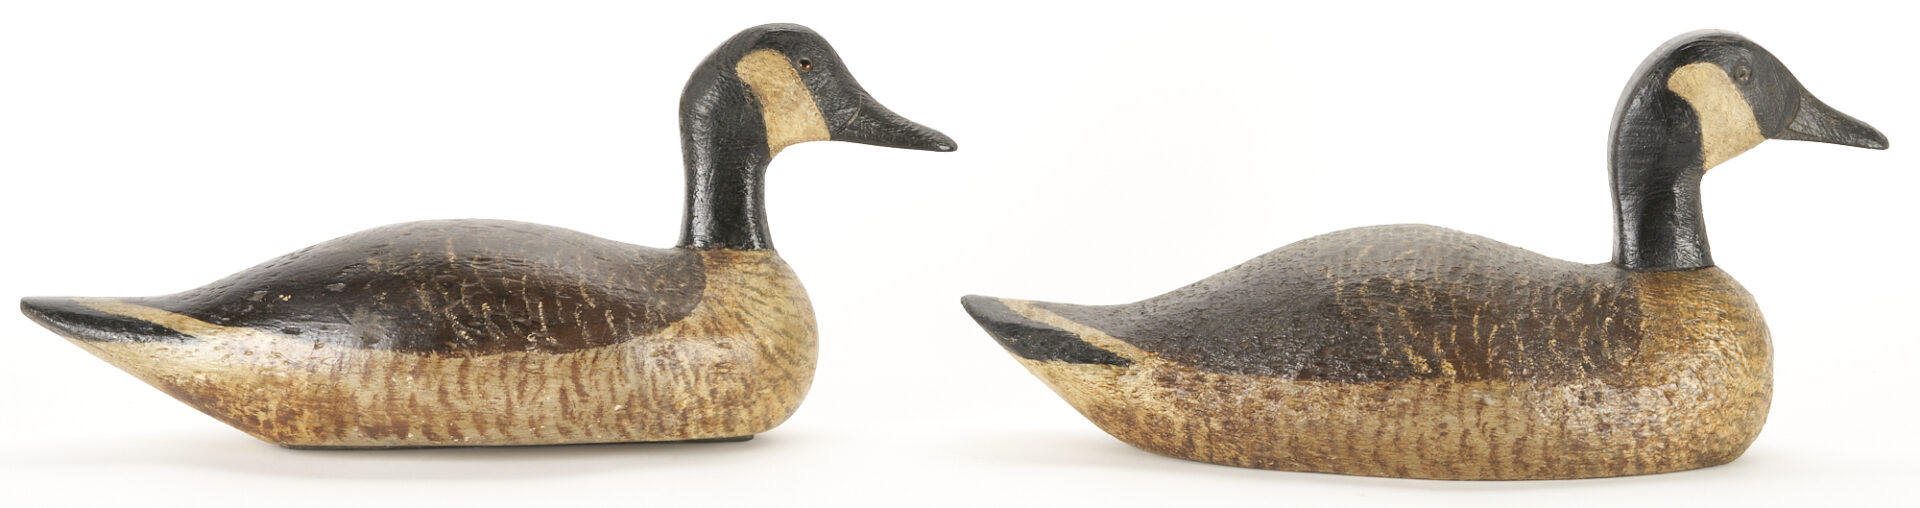 Lot 632: 9 Carved & Painted Canadian Geese  Decoys